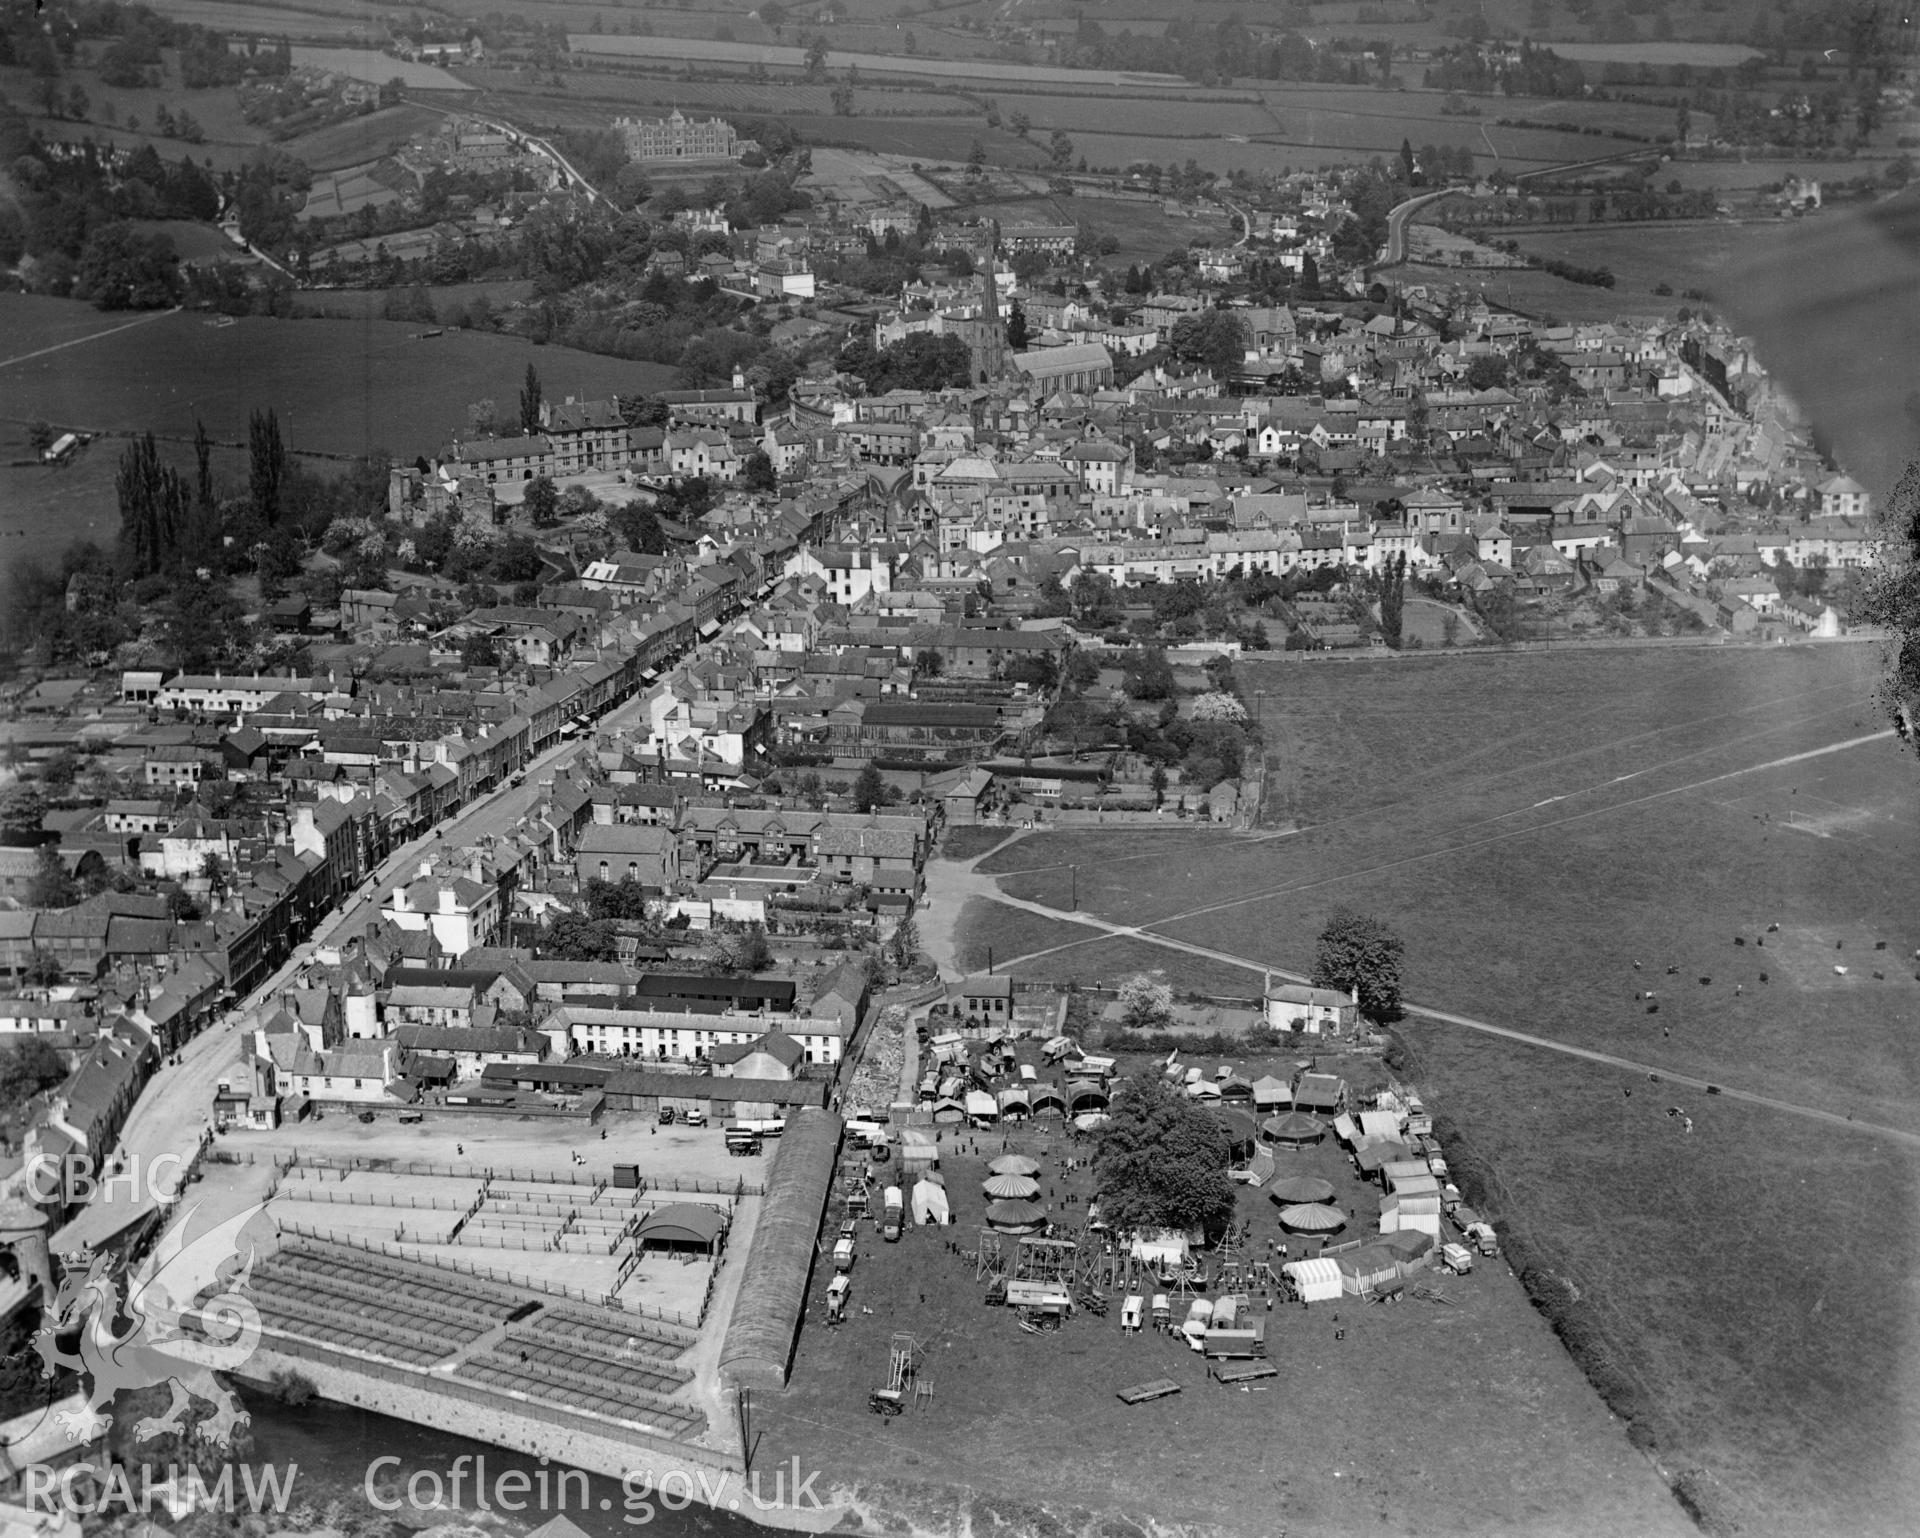 View of Monmouth showing cattle market and fairground with fair in progress, oblique aerial view. 5?x4? black and white glass plate negative.